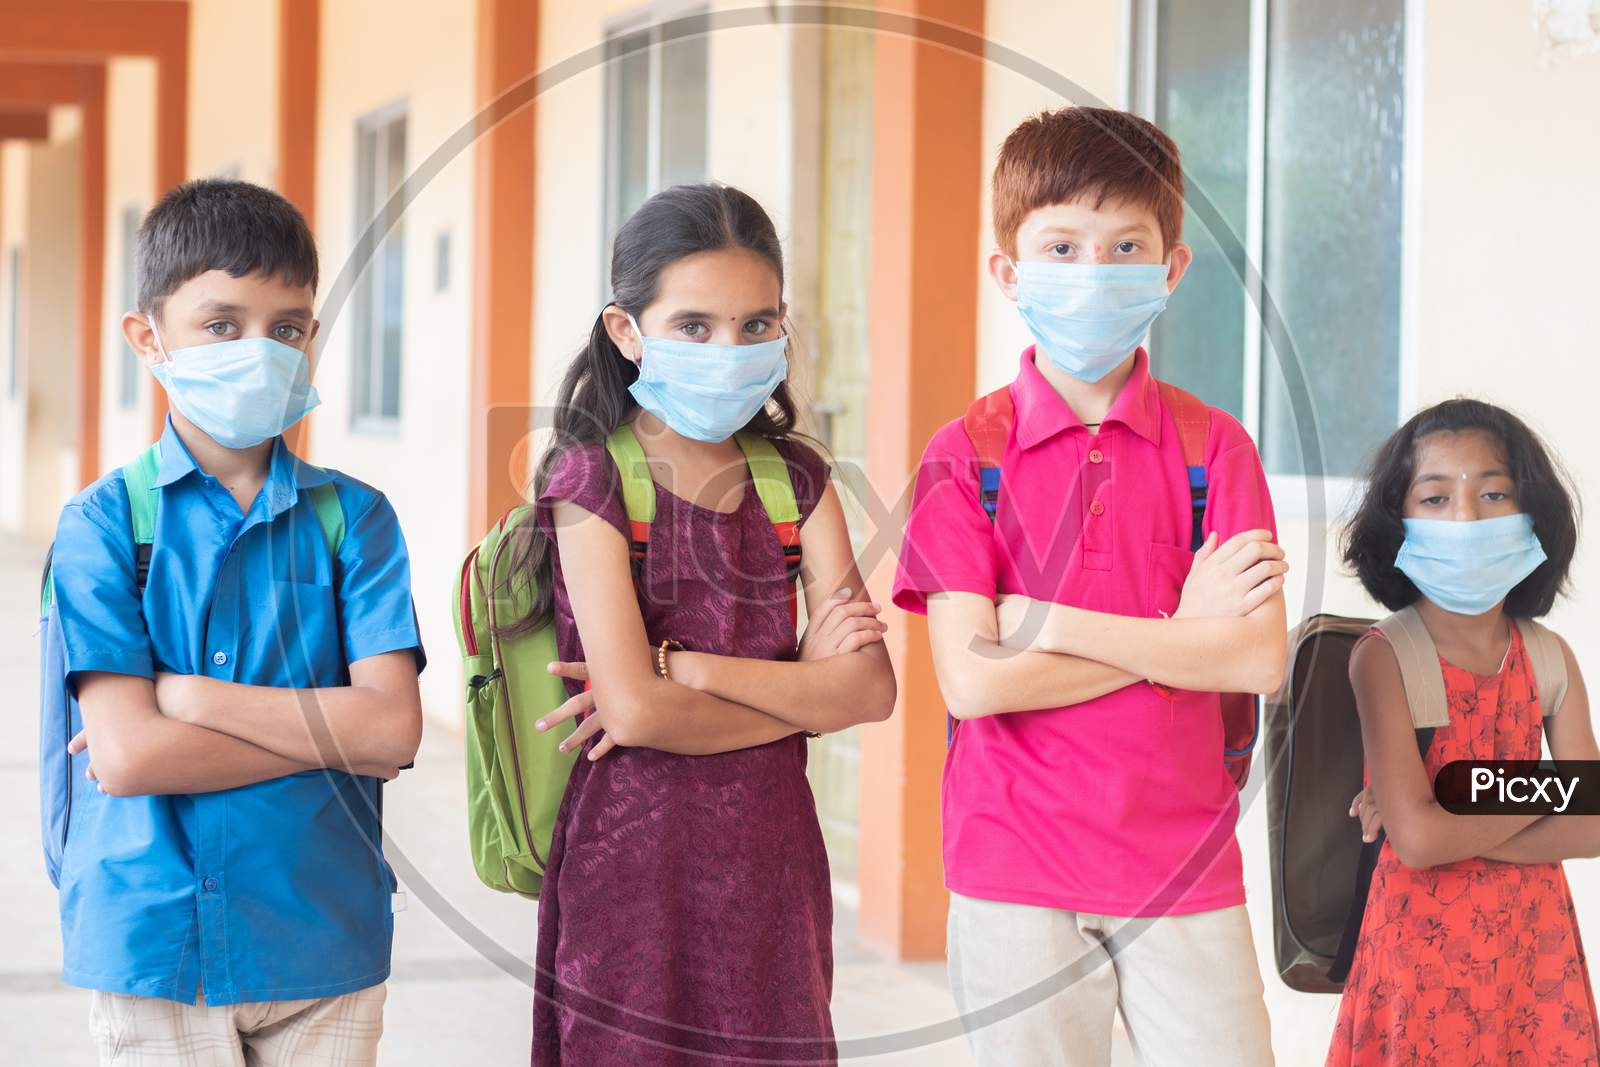 Children In Medical Mask With School Backpack Standing With Arms Crossed By Looking To The Camera- Concept Of Back To School And Reopen.